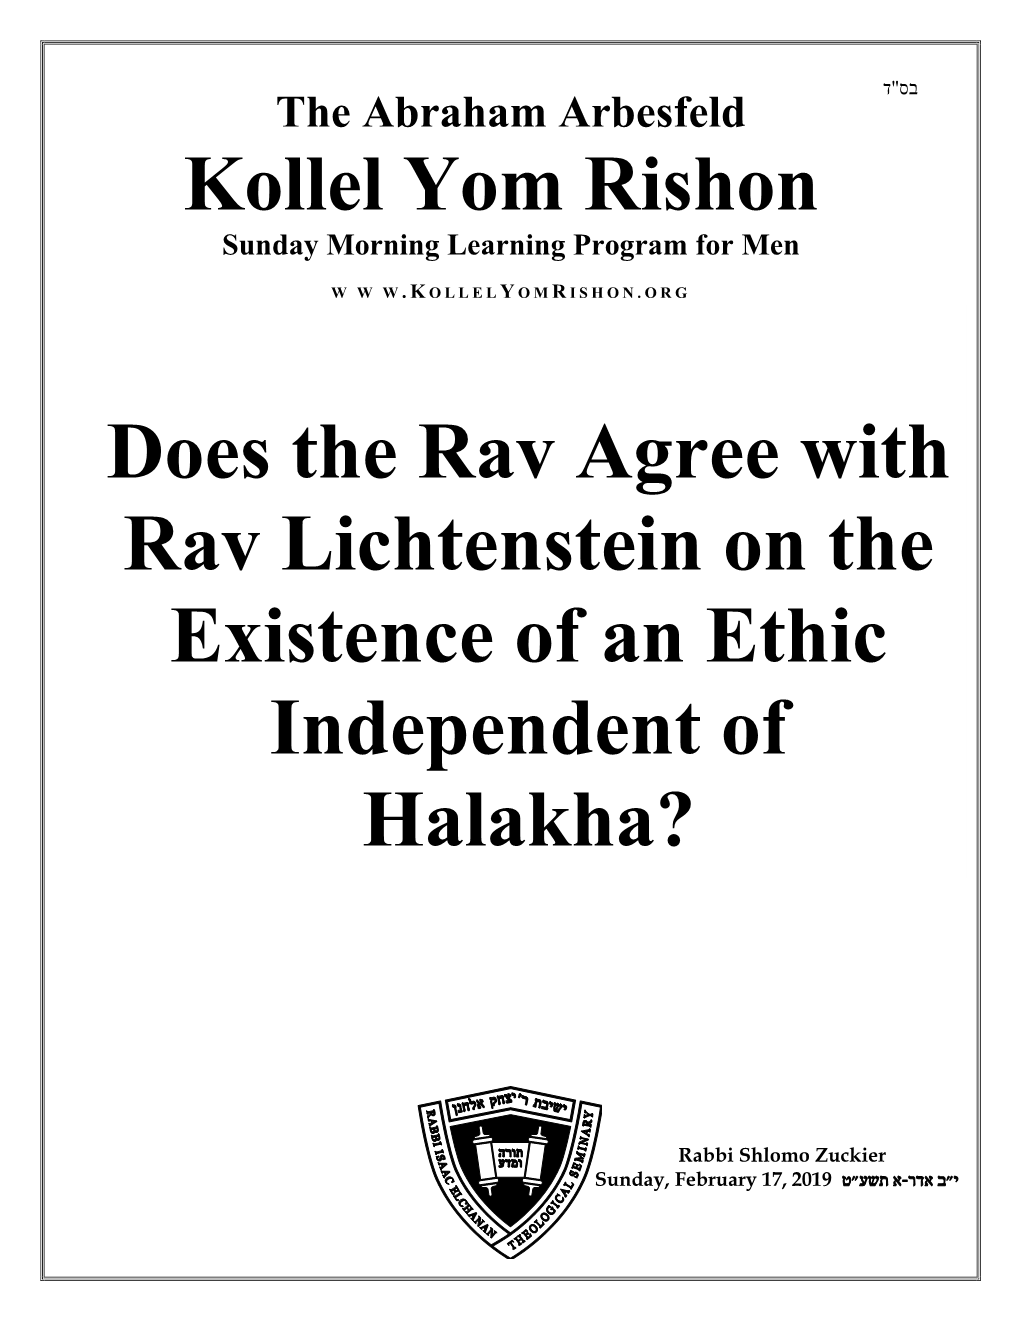 Does the Rav Agree with Rav Lichtenstein on the Existence of an Ethic Independent of Halakha?